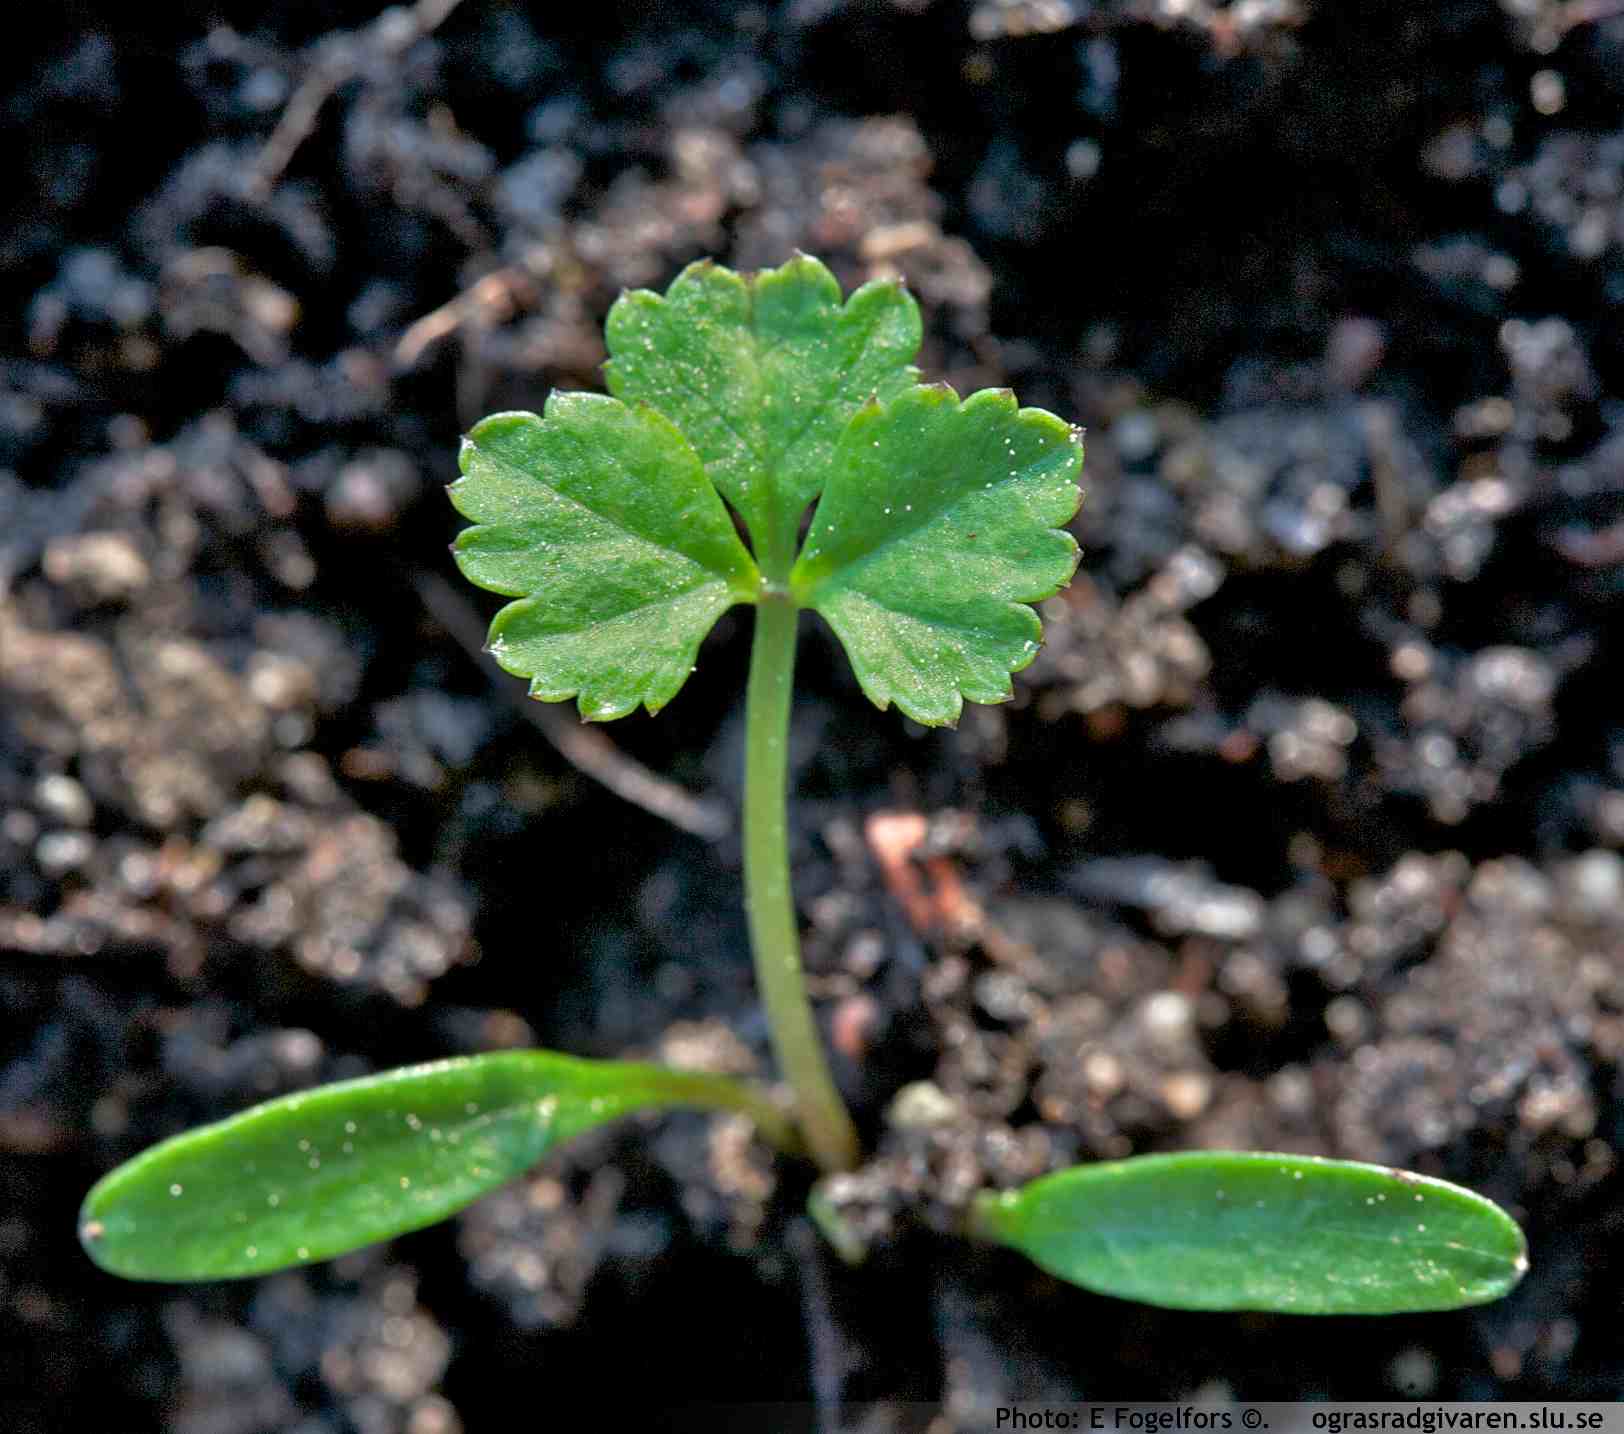 Seedling with first true leaf.